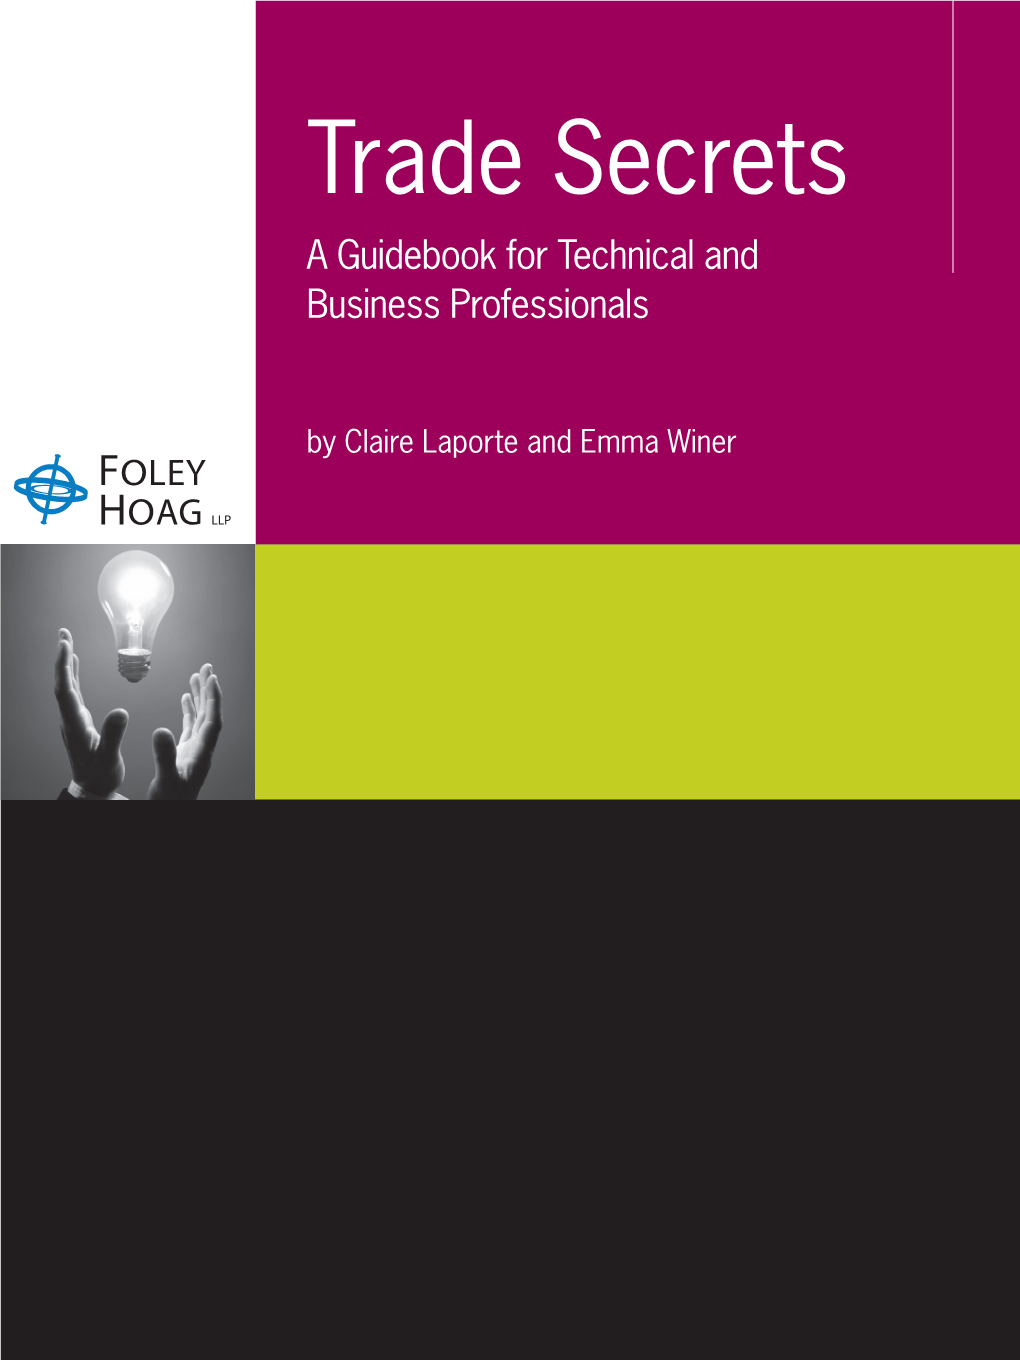 TRADE SECRETS by Claire Andemmawiner Laporte Business Professionals a Guidebookfortechnical and Trade Secrets